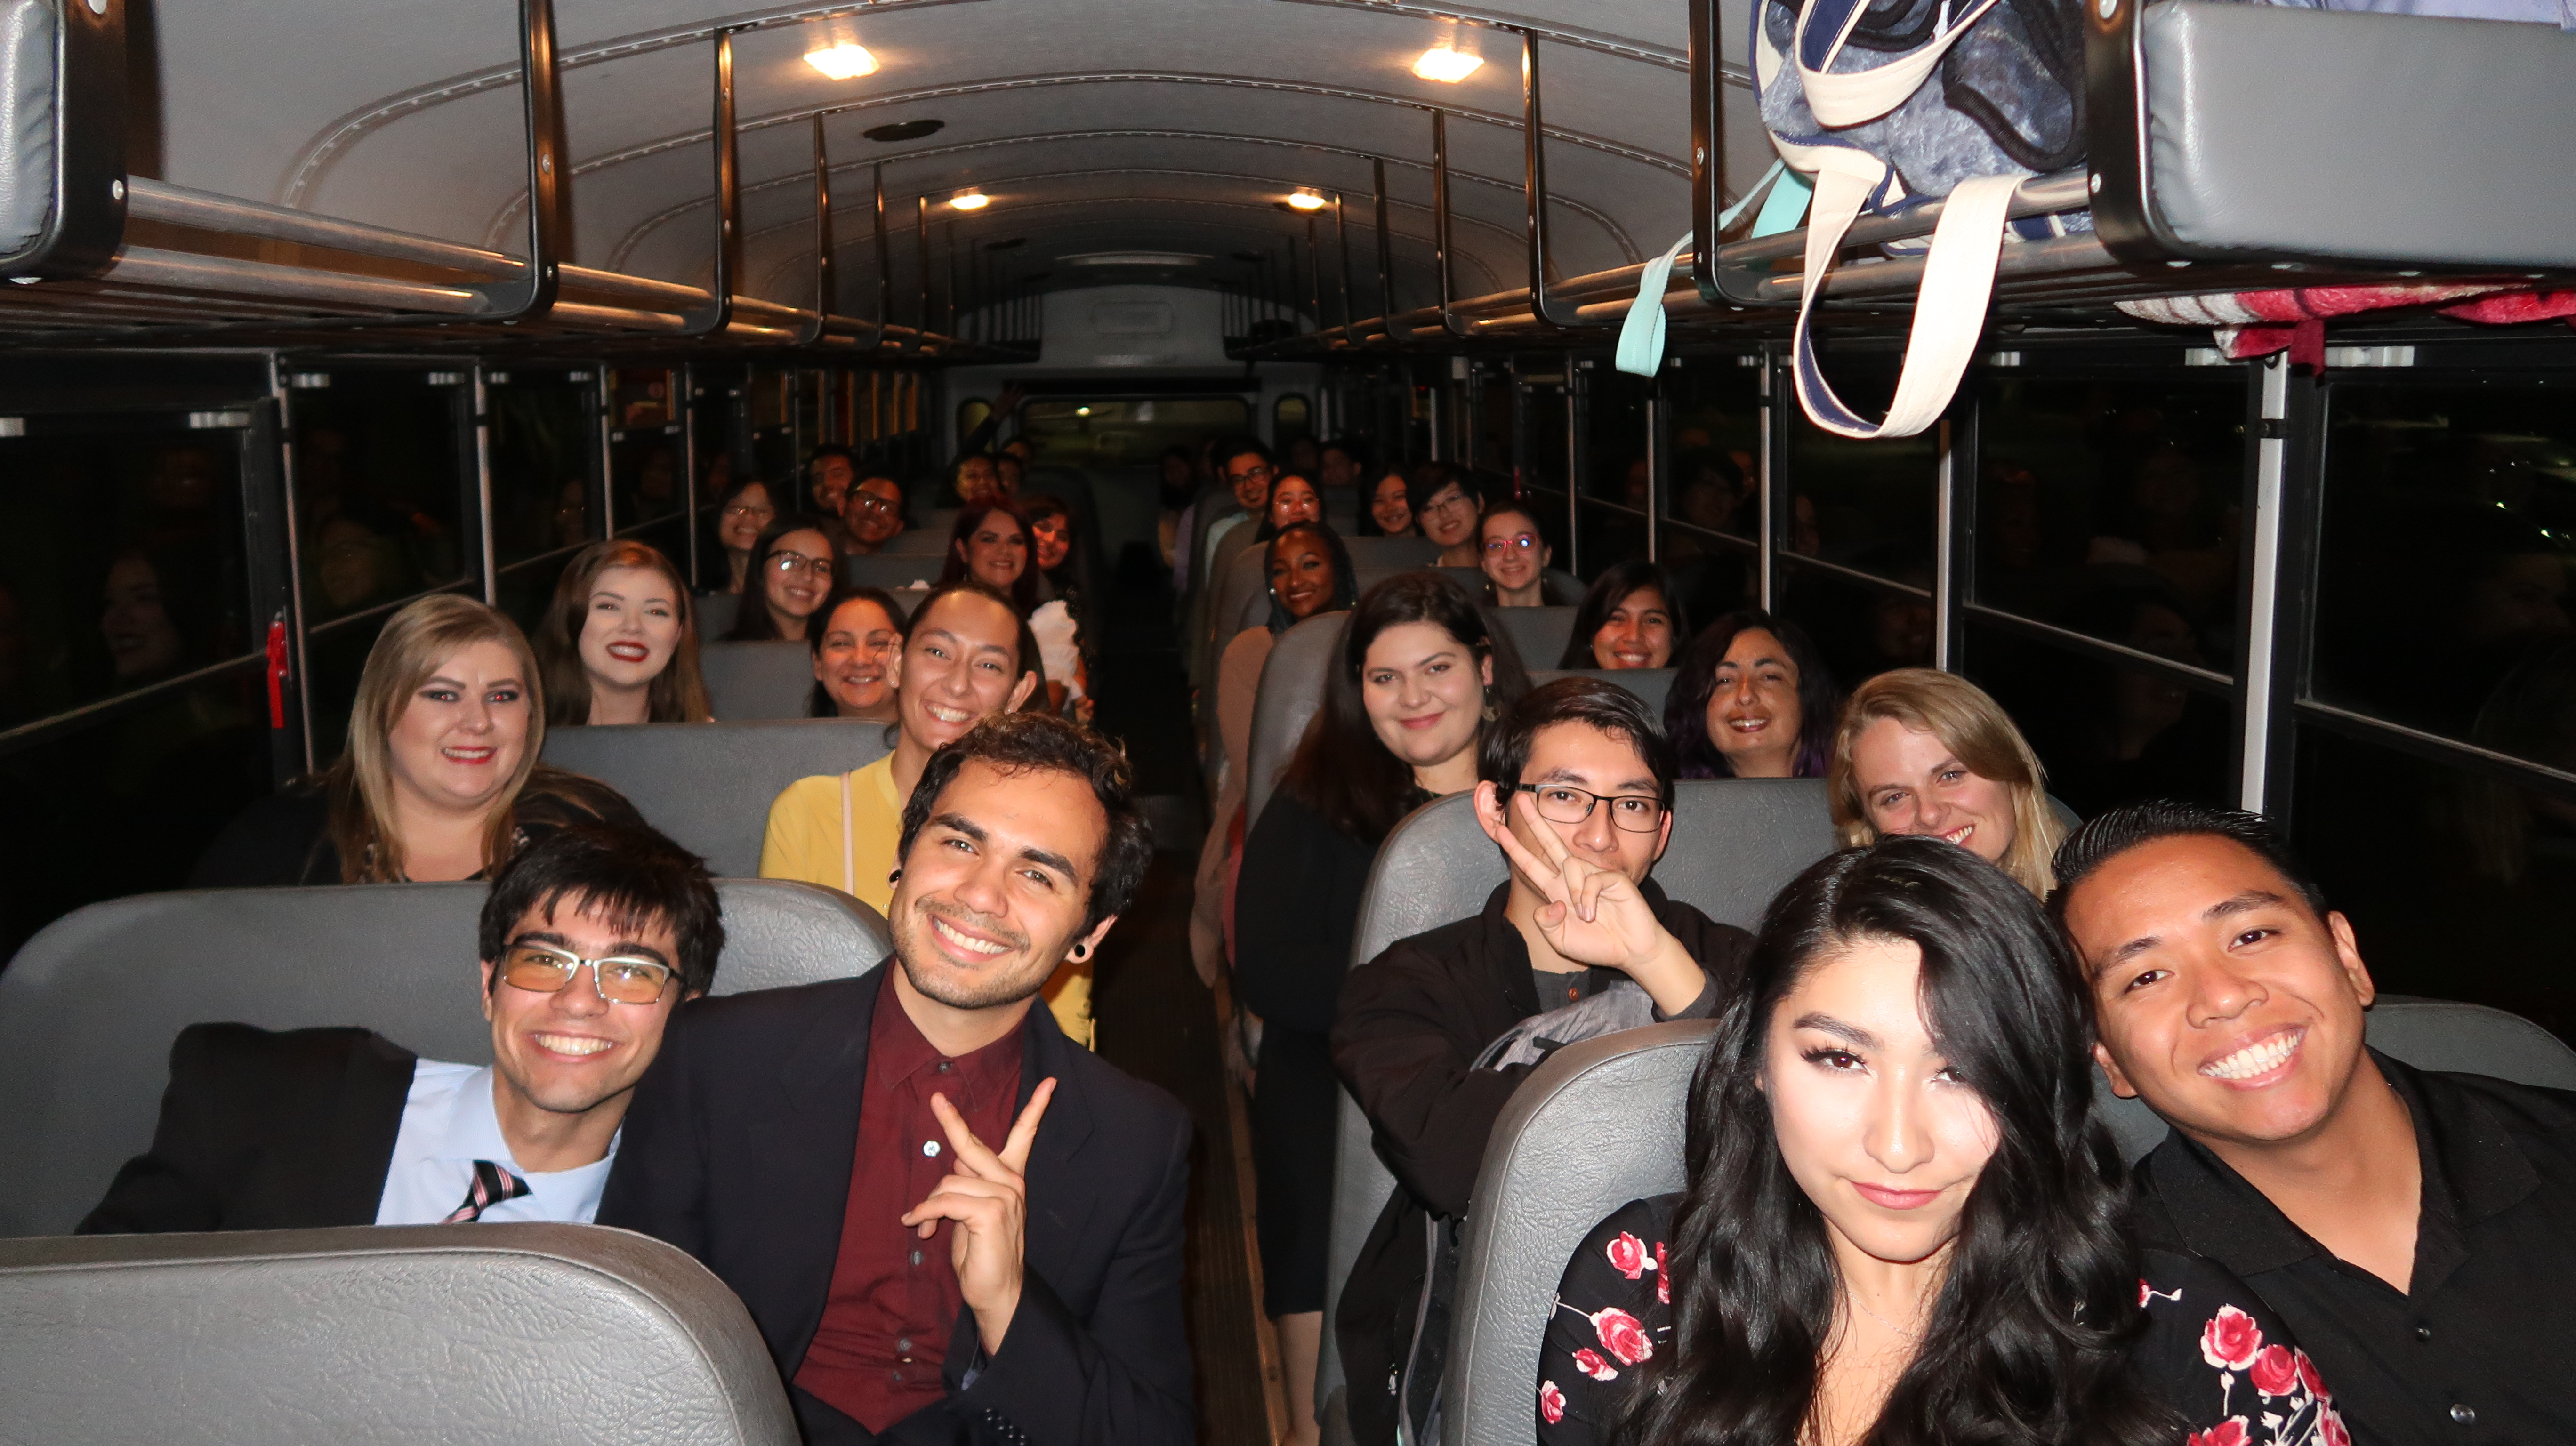 ARCHES students on the bus to attend the Newsies event